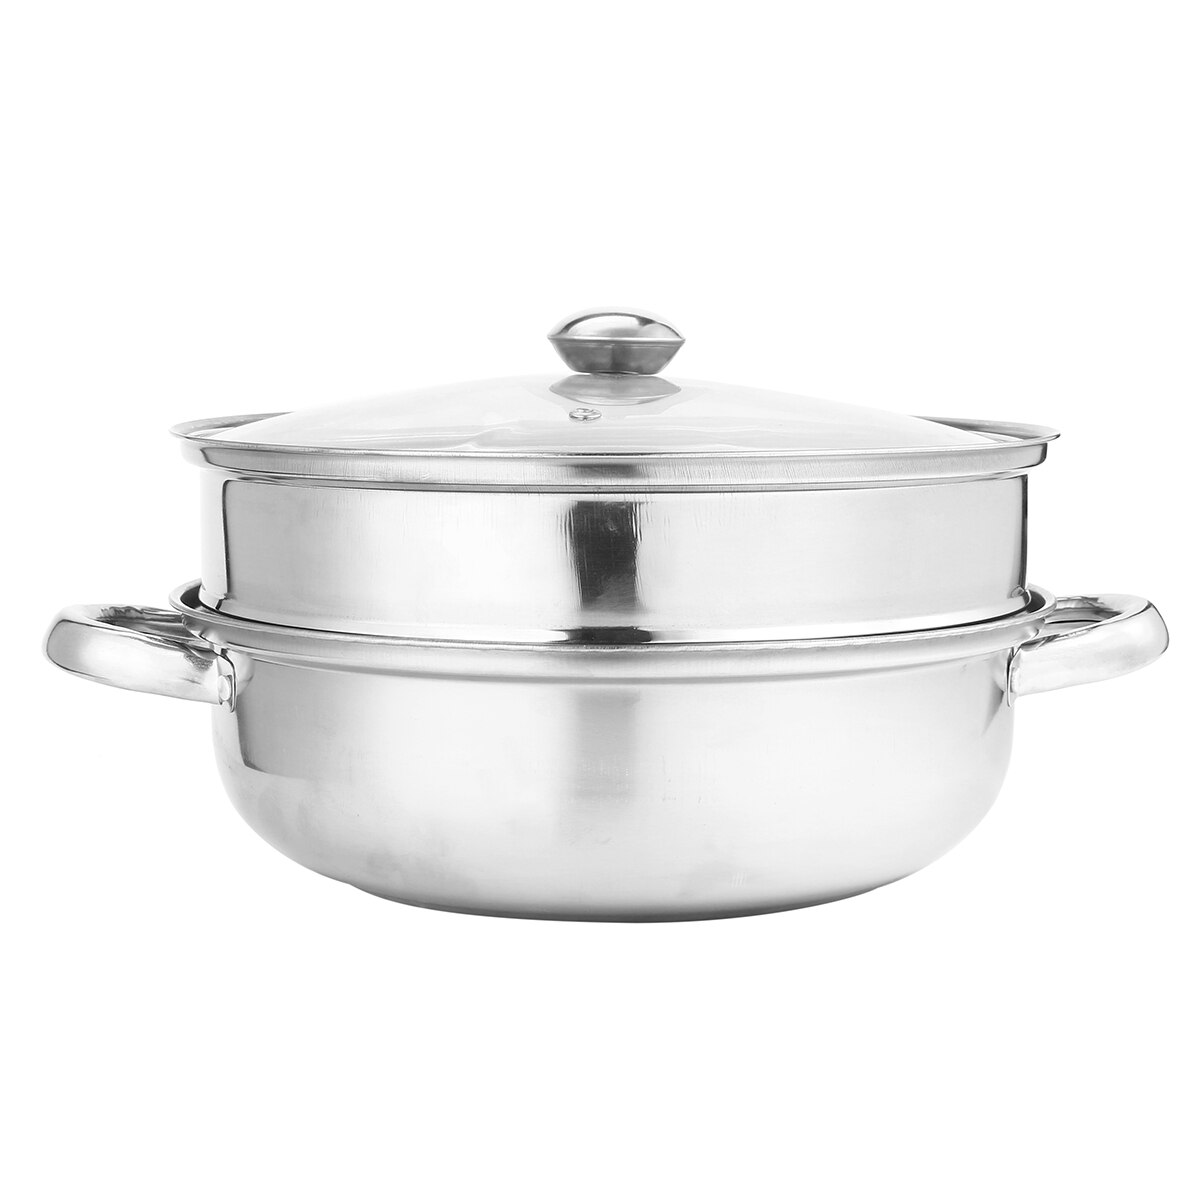 2 Tiers Food Steamer Pot Steaming Cookware Kitchen...